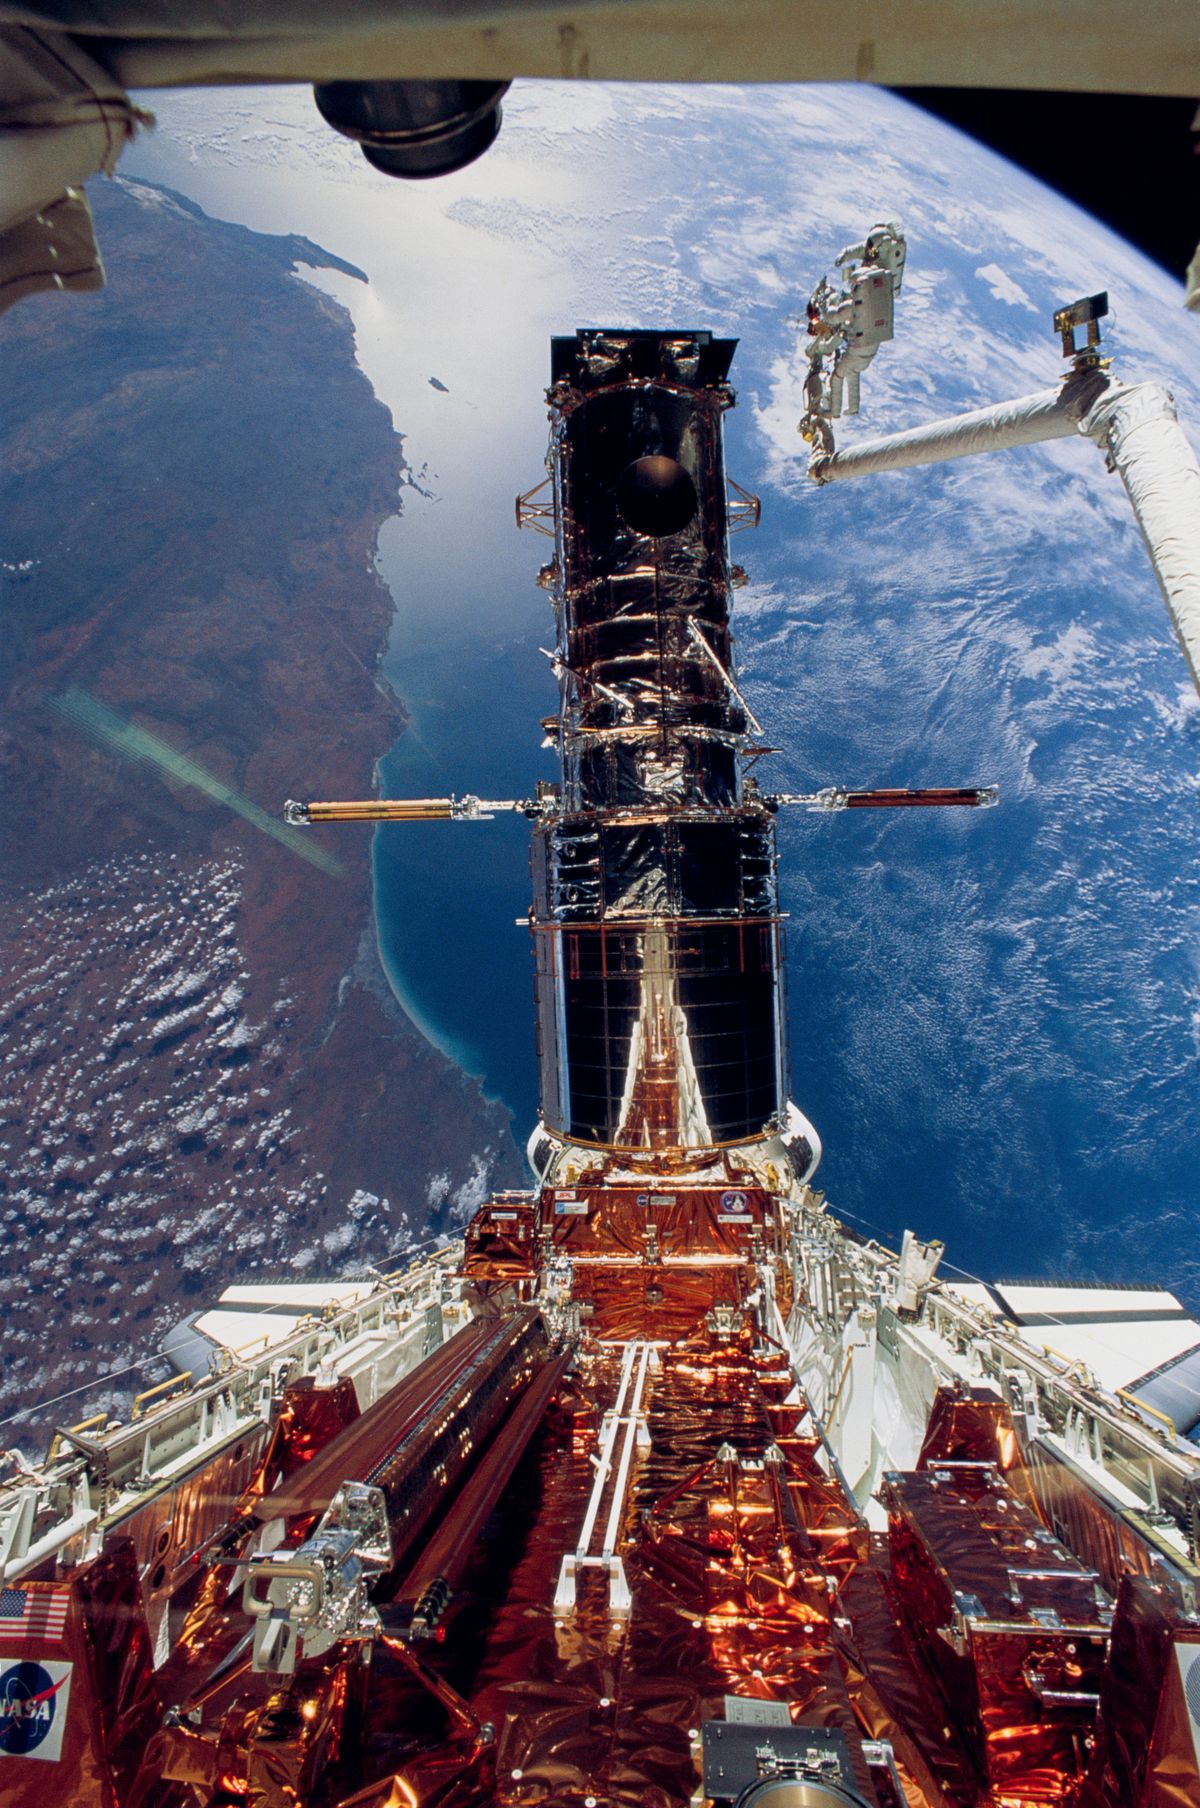 A photo provided by NASA shows repairs being made to the Hubble Space Telescope by astronauts on the space shuttle Endeavour in 1993.  (NASA)